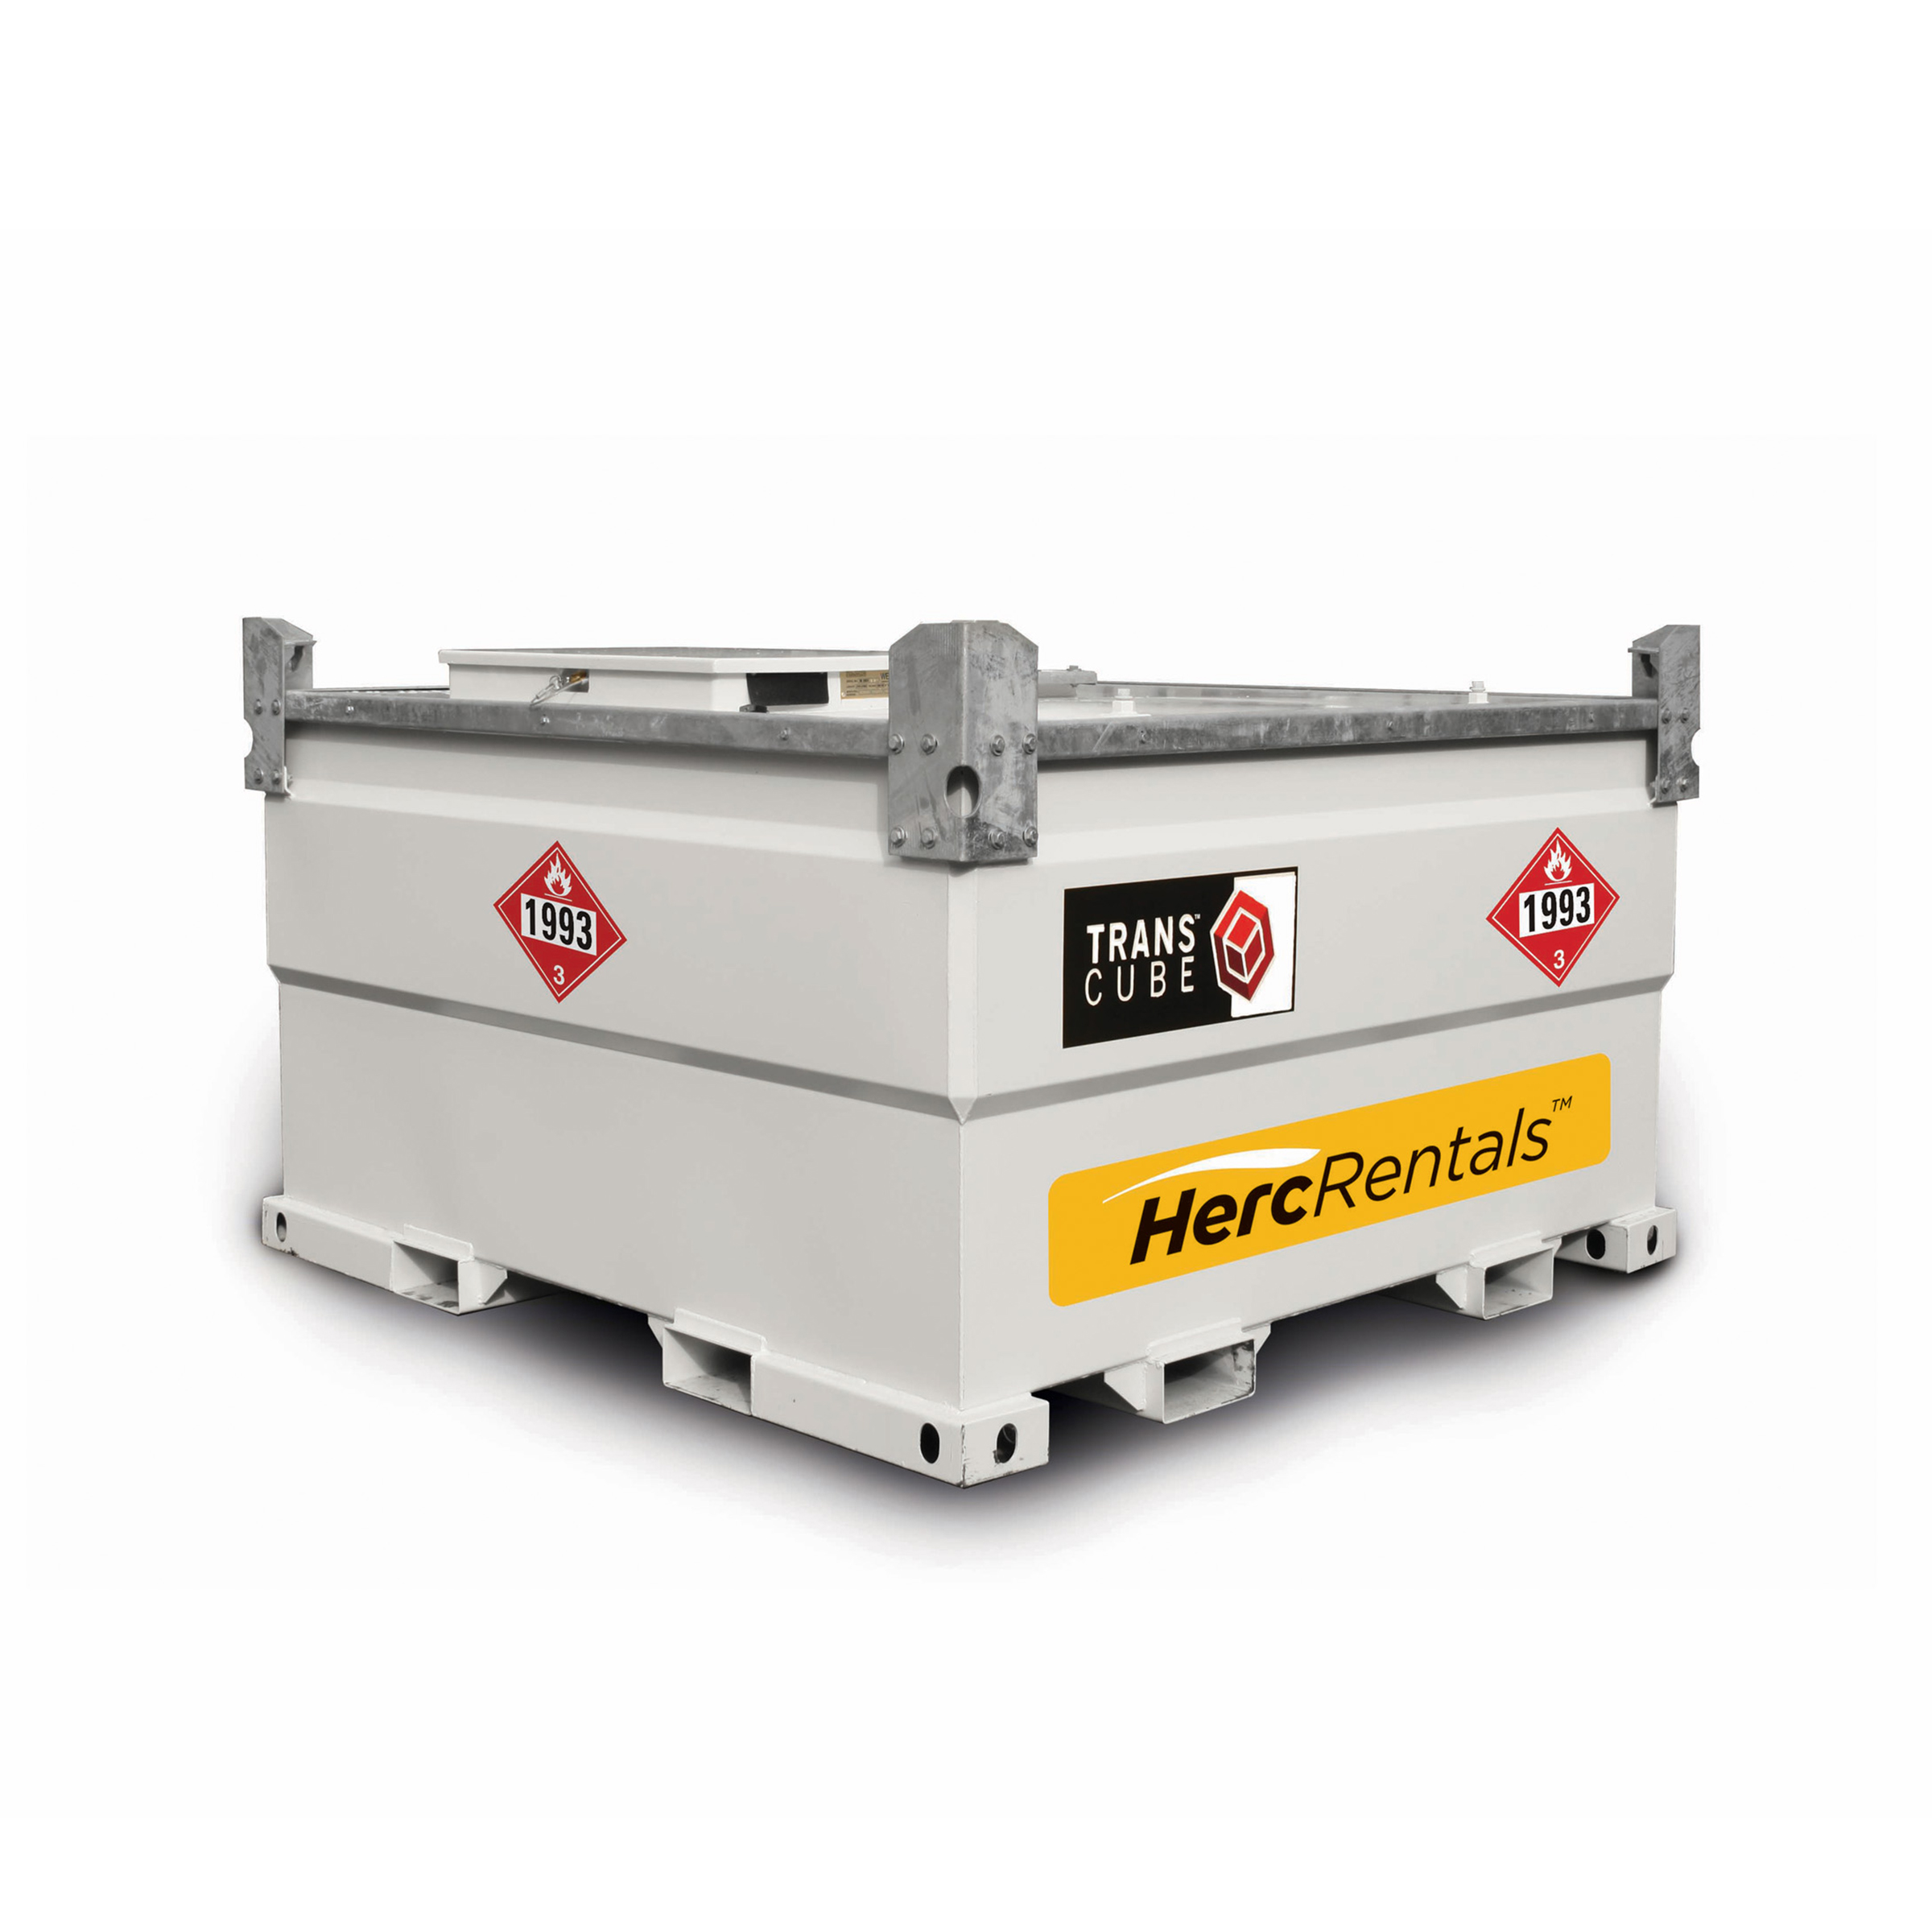 Herc Rentals: Equipment and Tool Rental for Construction and ...